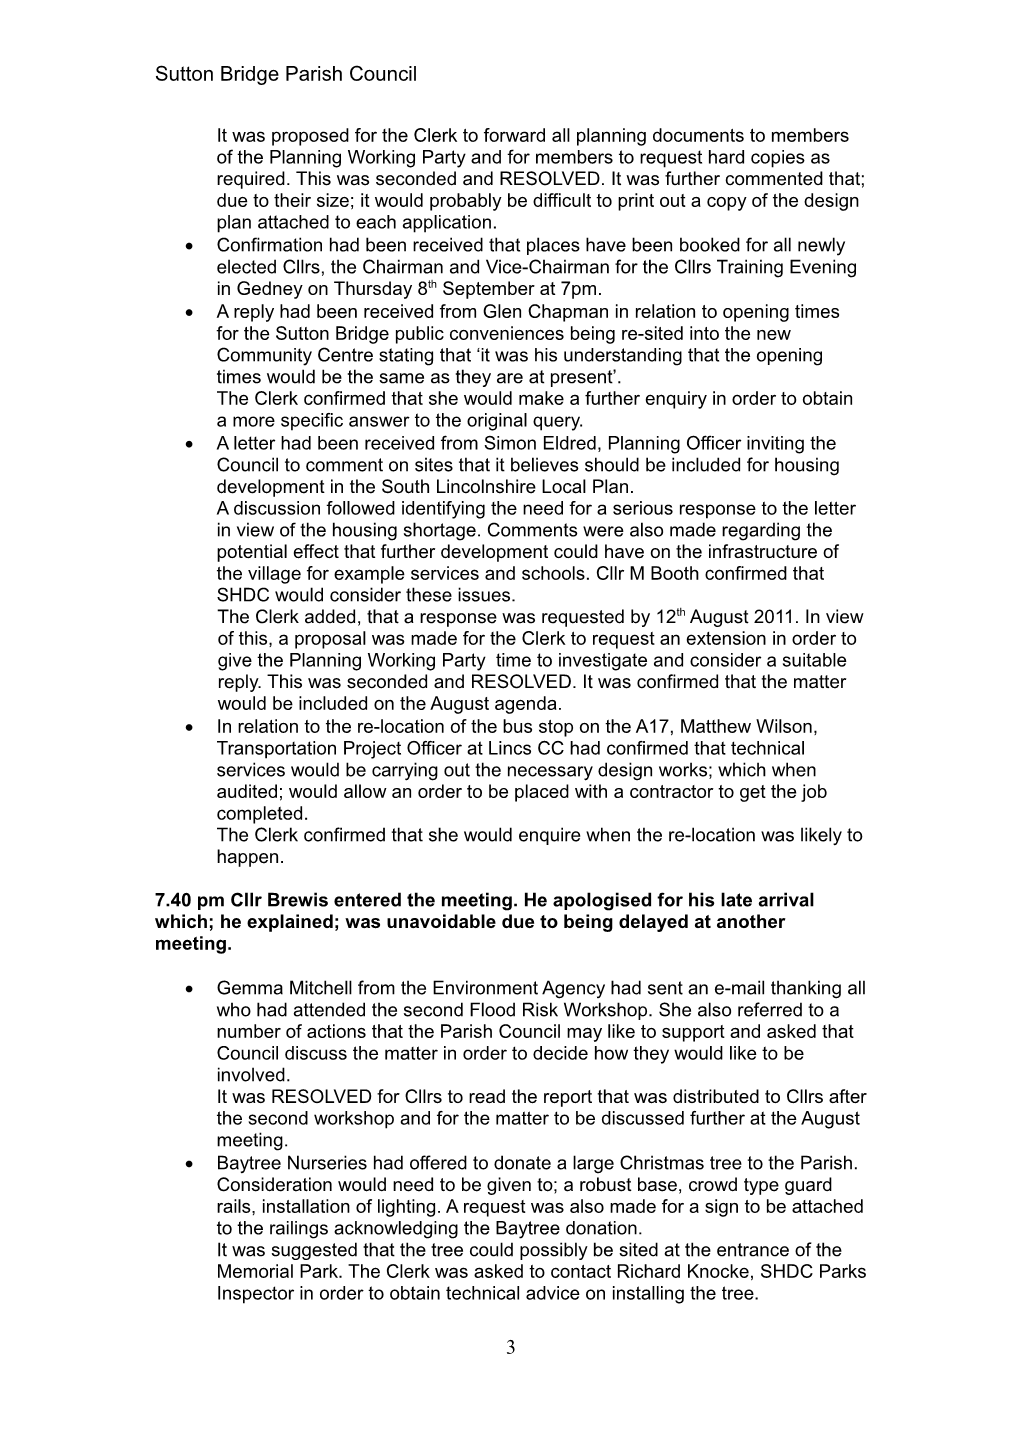 Minutes of the Parish Council Meeting Held on 22Nd January 2011 at St Matthews Church Sutton